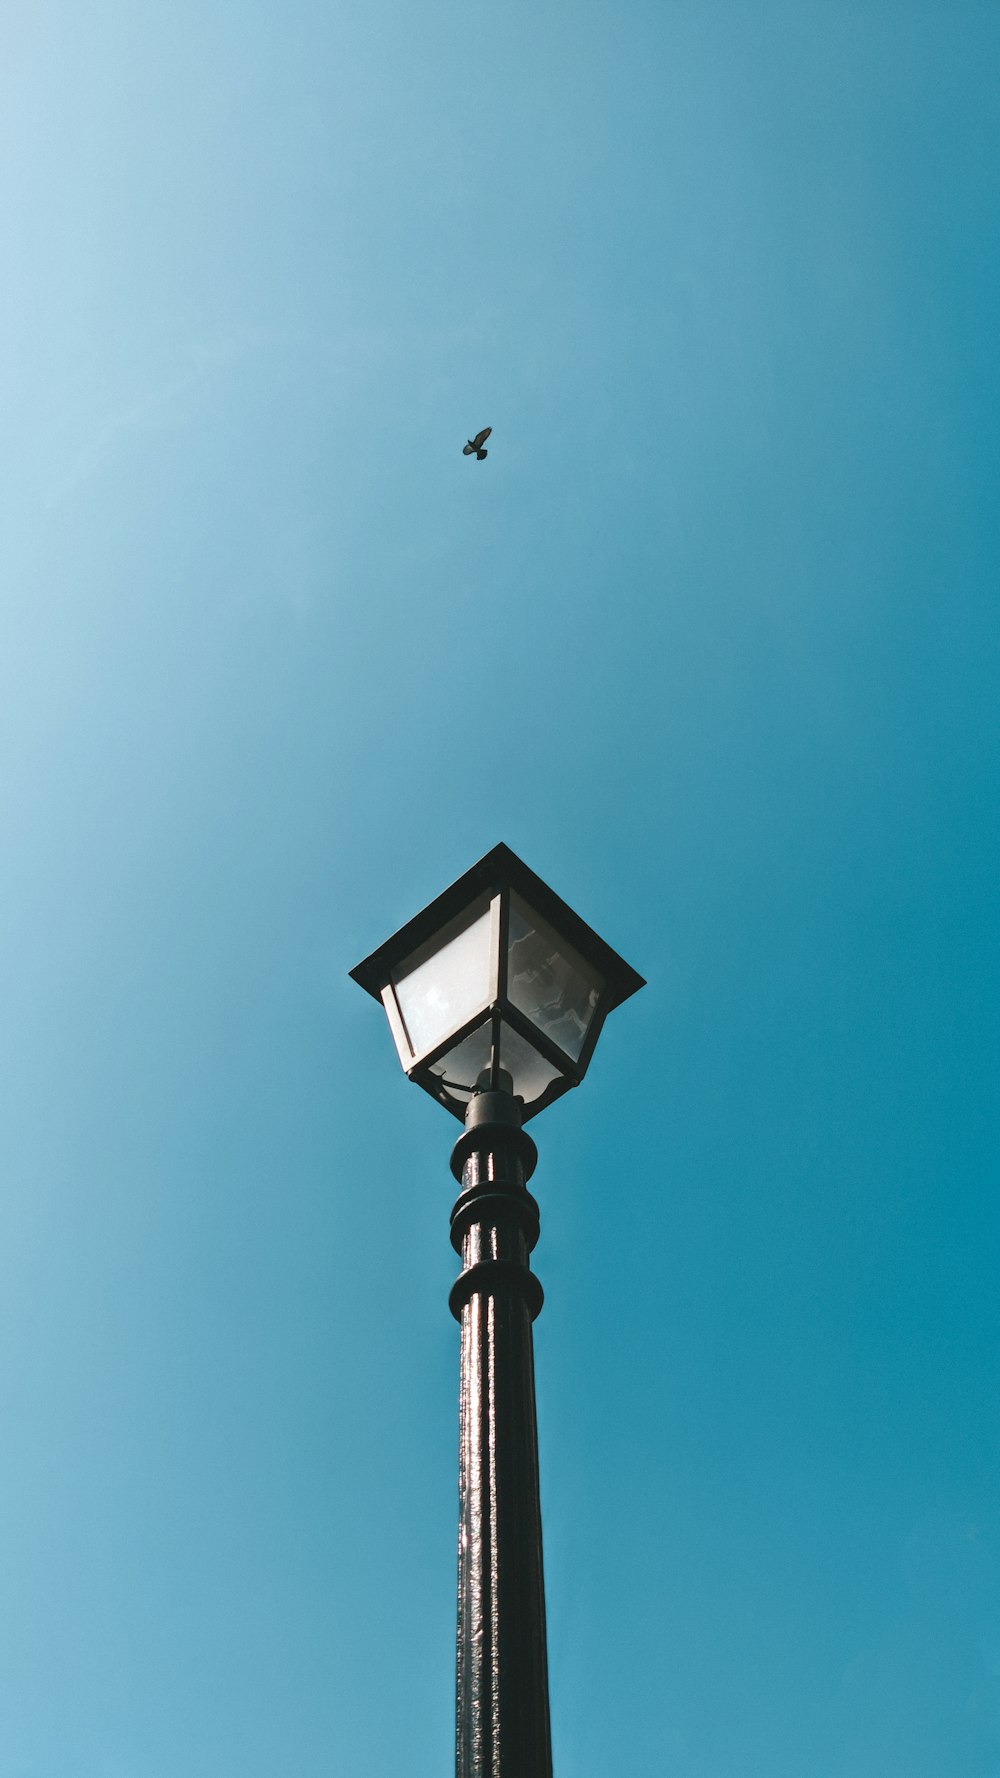 a bird flying over a tall tower